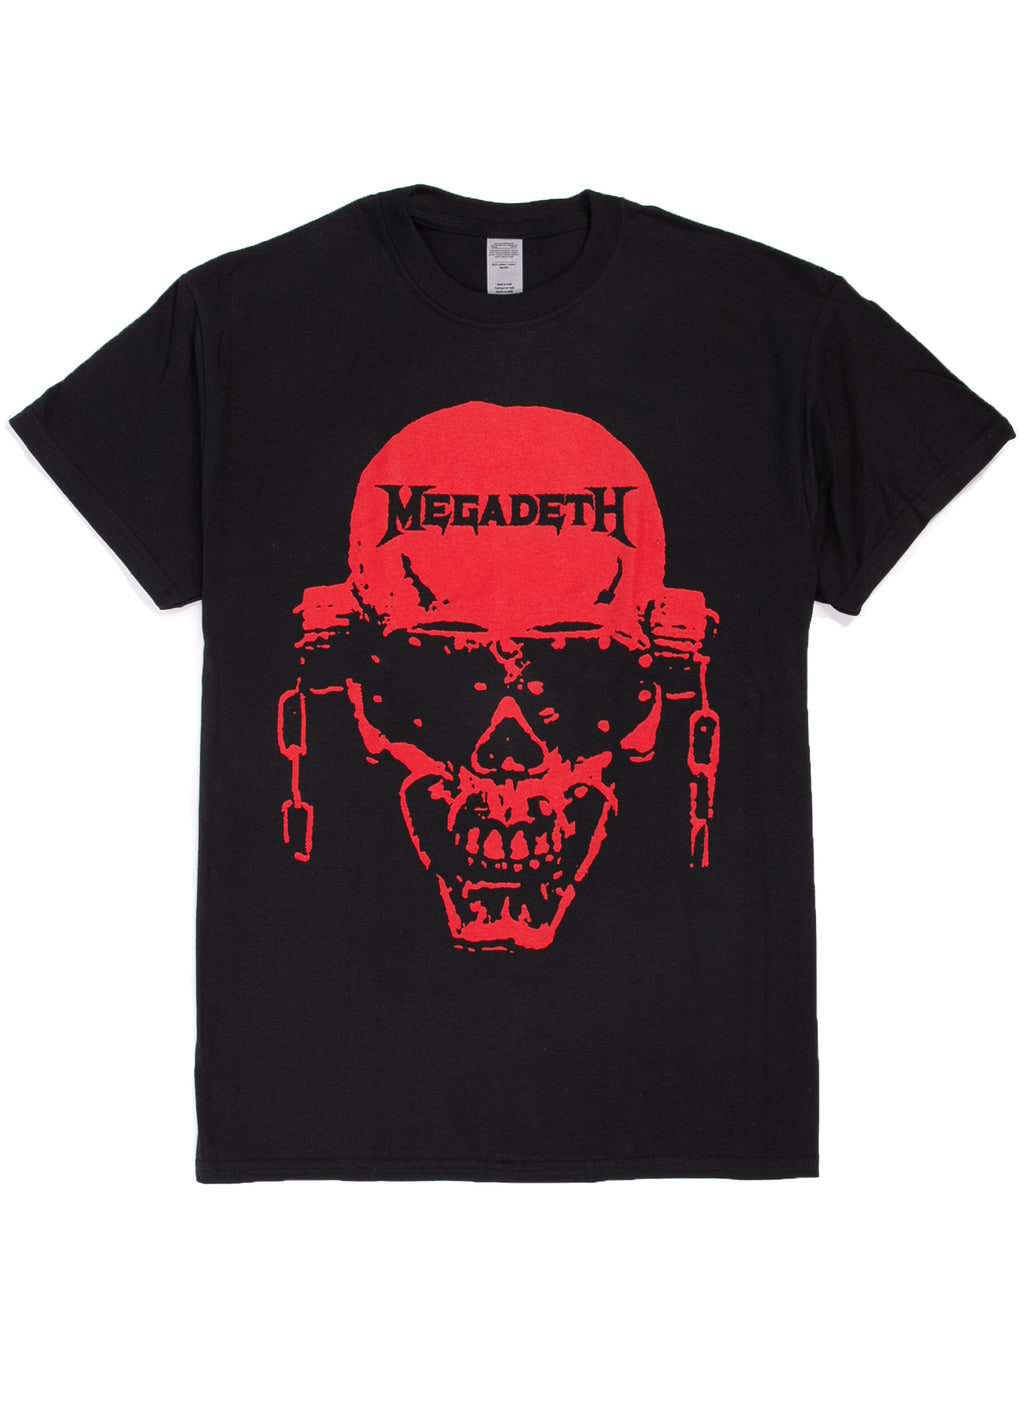 Megadeth vic high contrast black and red t-shirt.